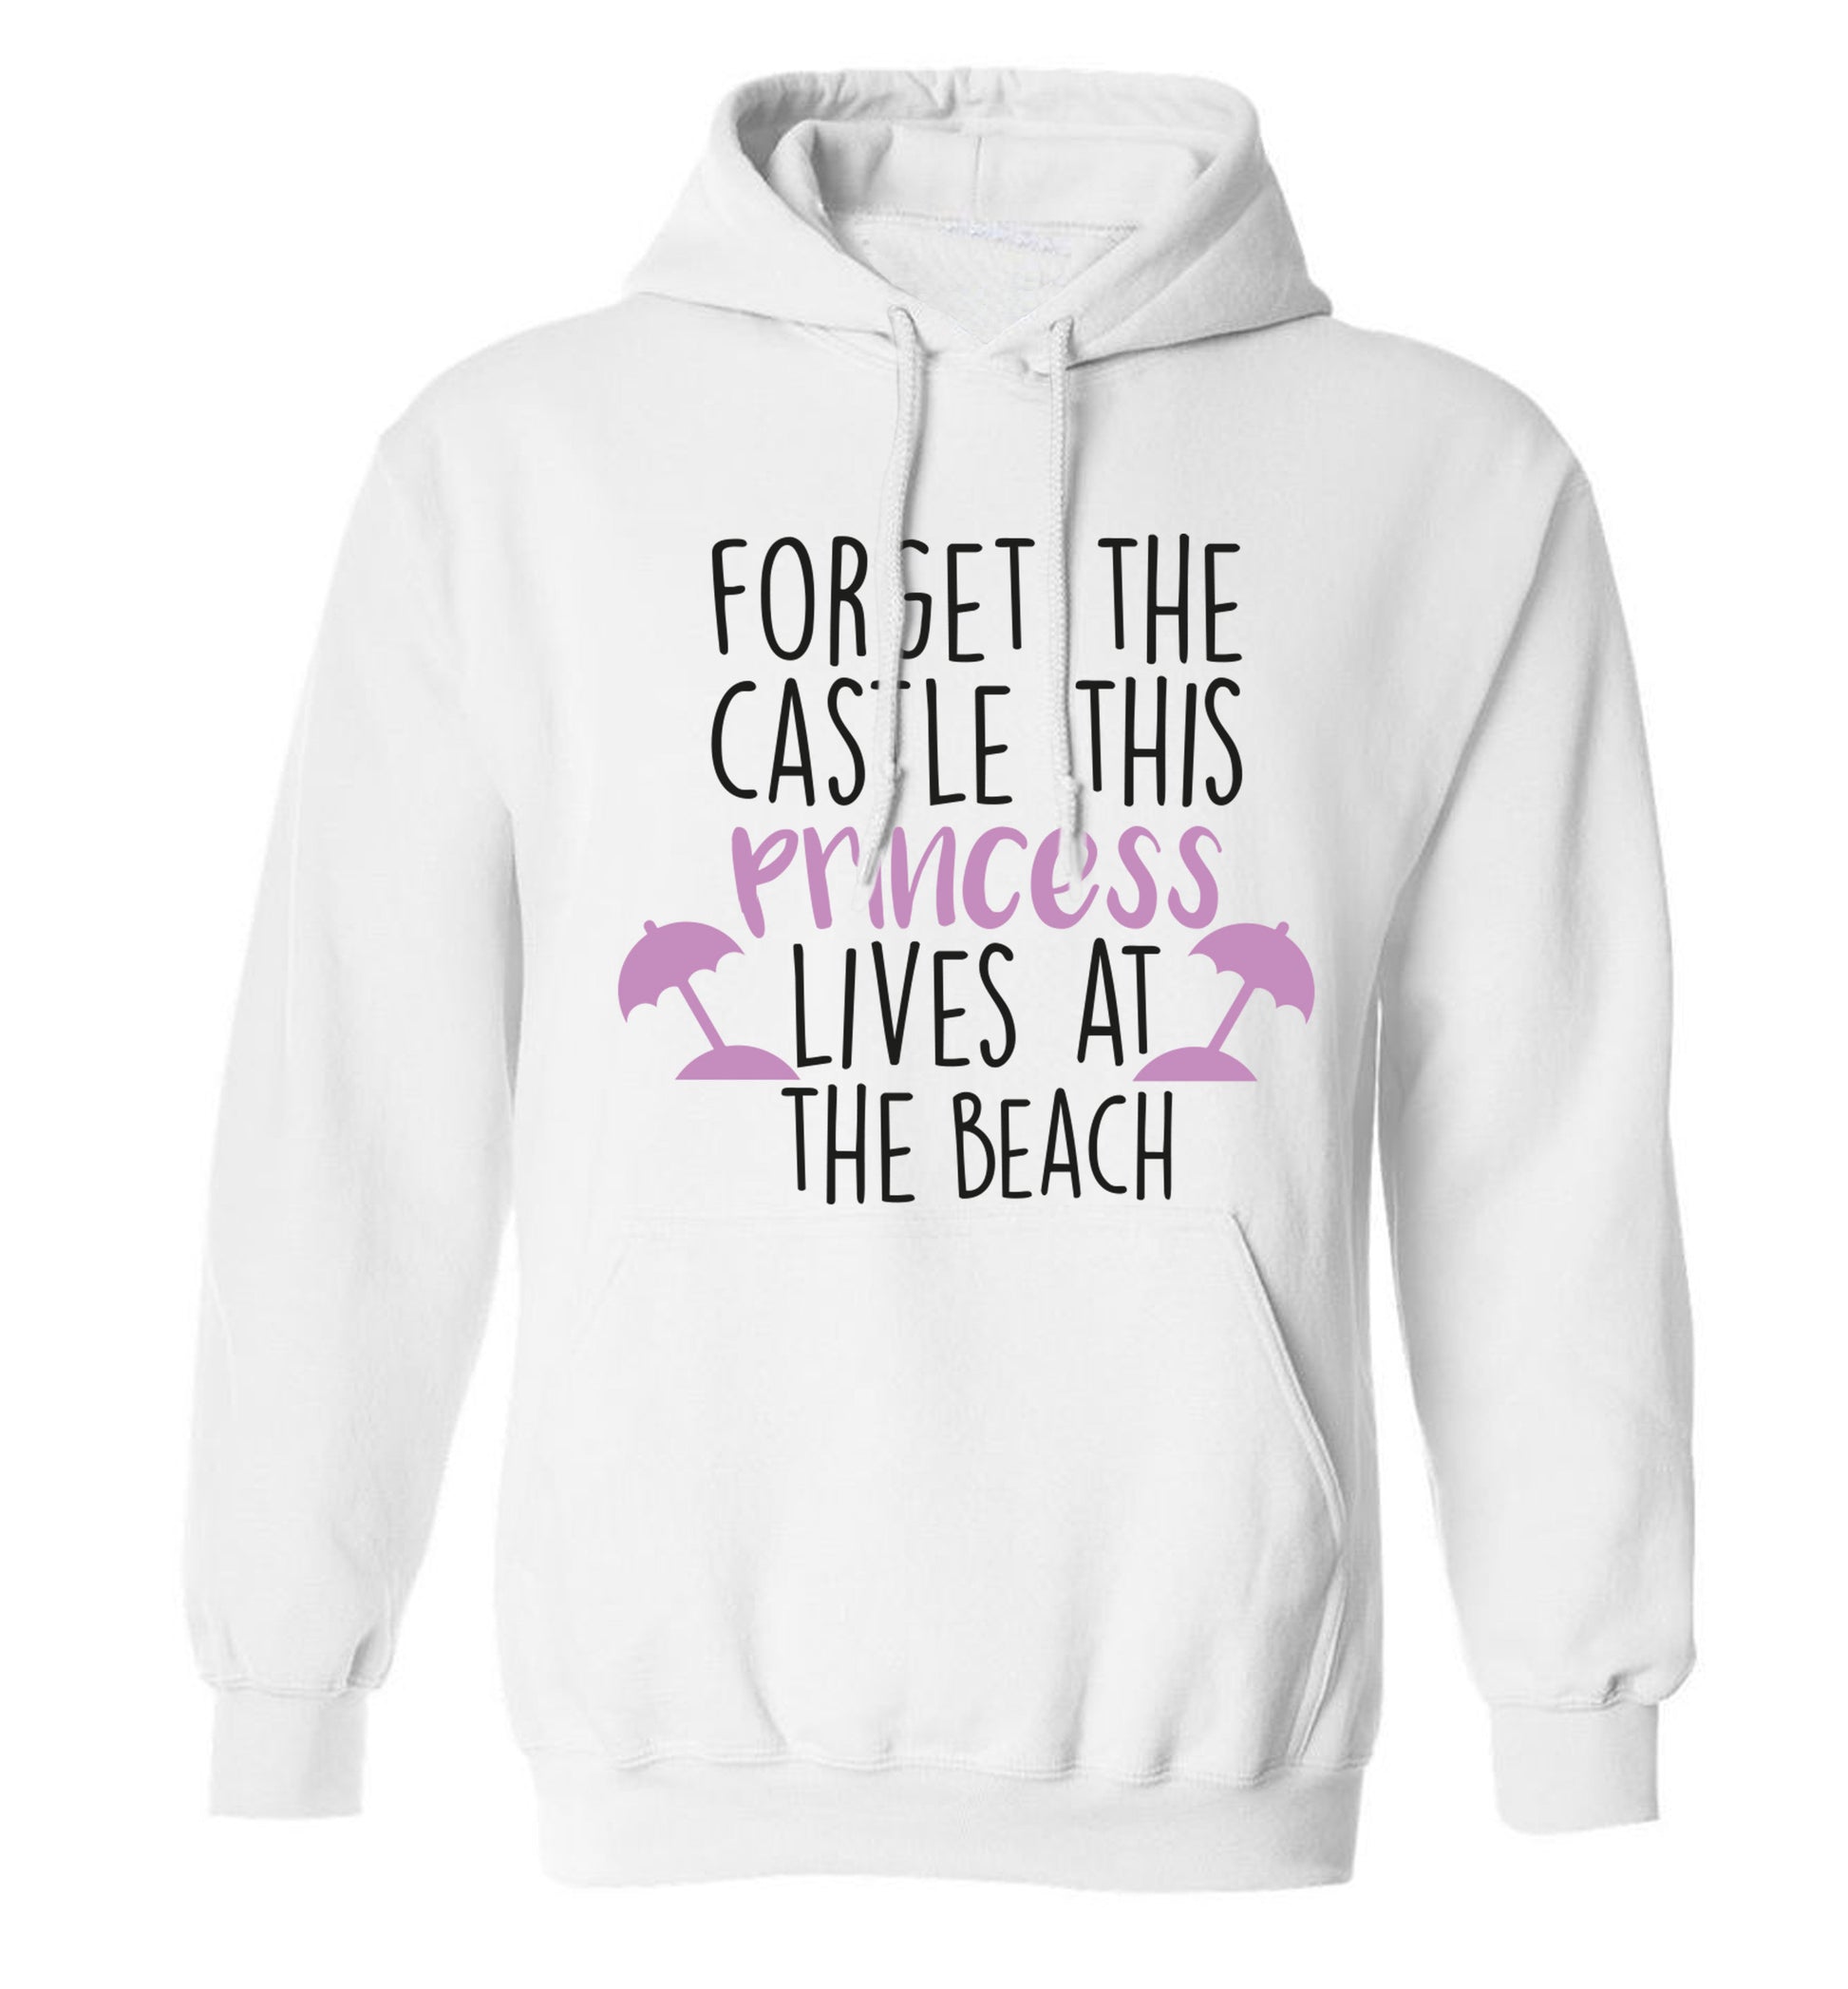 Forget the castle this princess lives at the beach adults unisex white hoodie 2XL